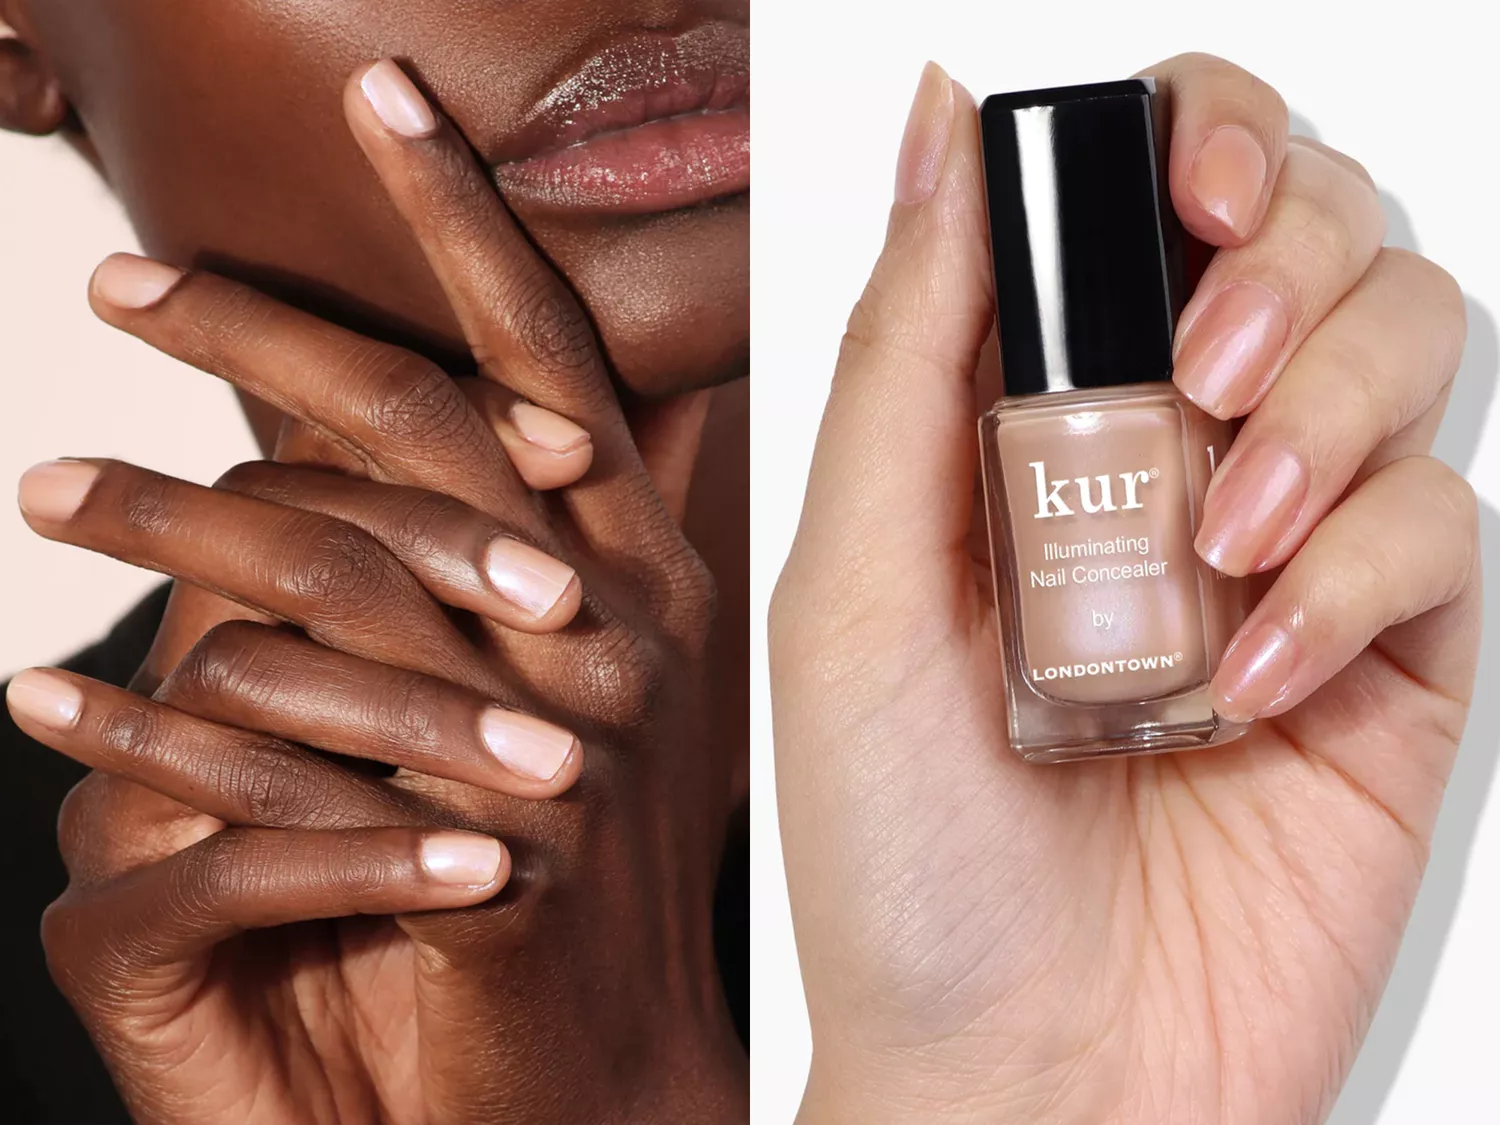 My Secret to a Rich-Girl Manicure Is This Universally Flattering Nail Concealer